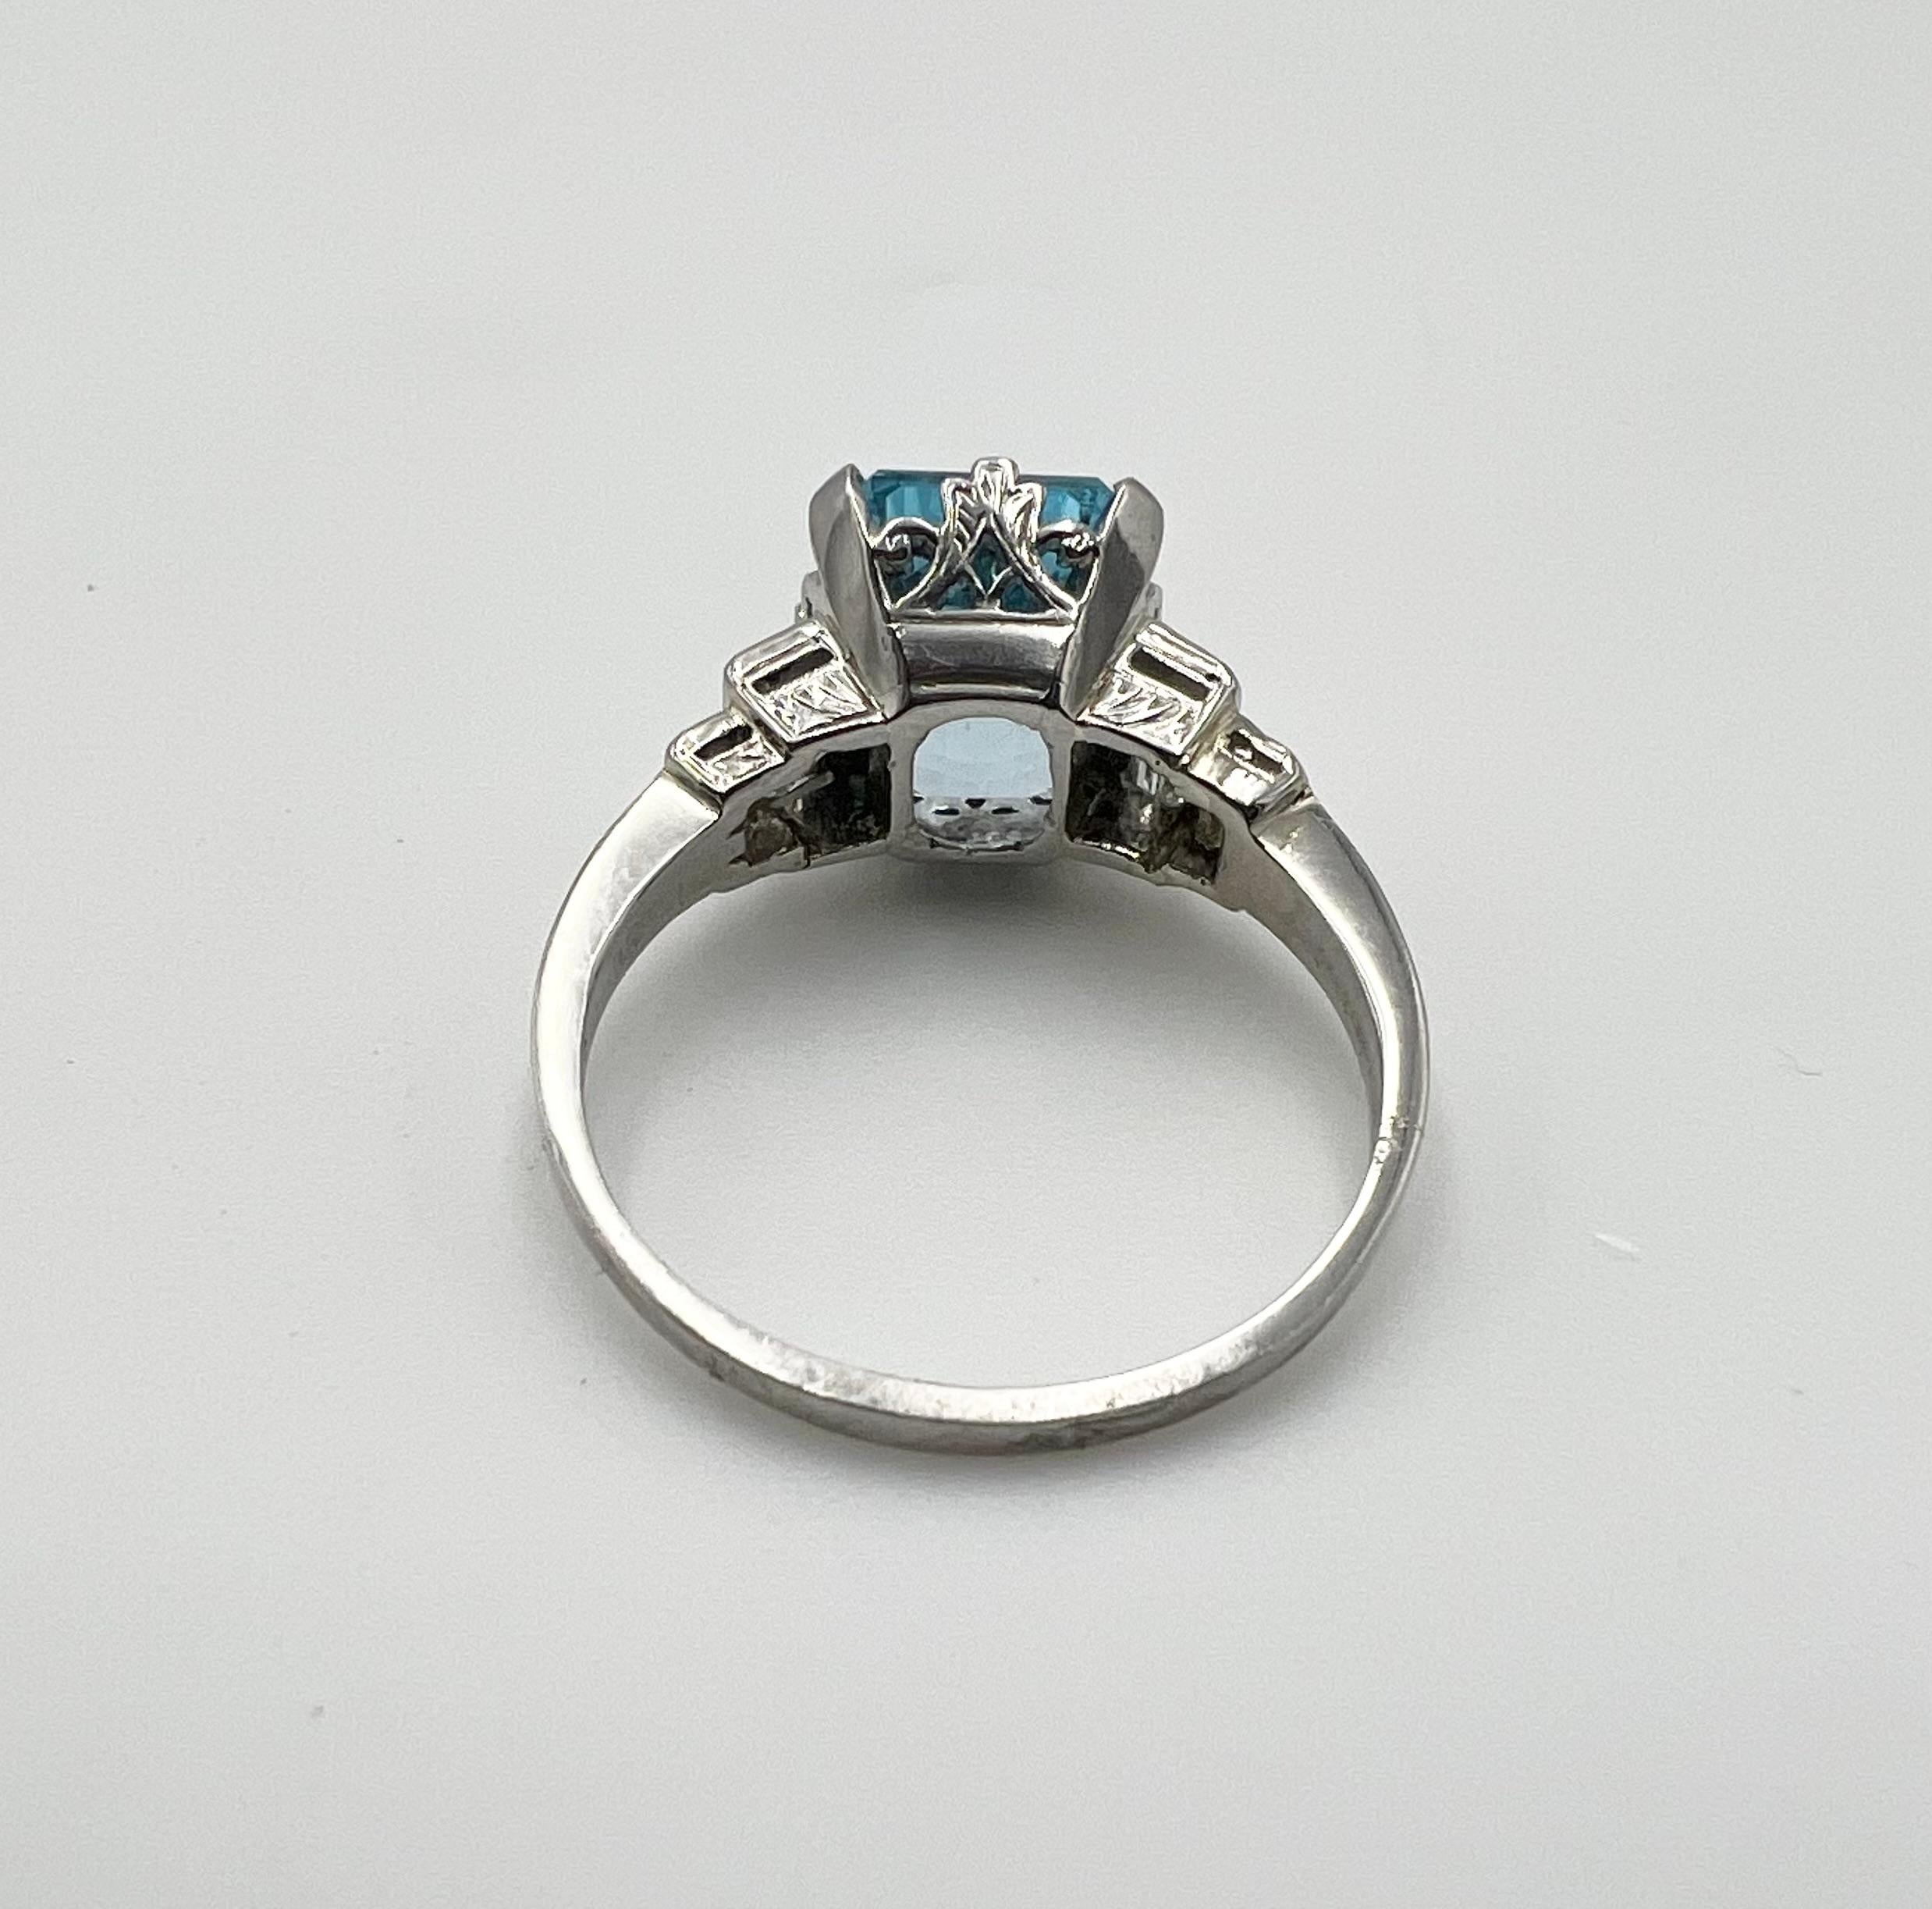 Topaz weight: 3.75ct

Diamond count: 4

Diamond color: E-F

Diamond clarity: VS1-VS2

Diamond weight: .36ct

Ring size: 7

Ring weight: 5.3 grams

Condition: excellent